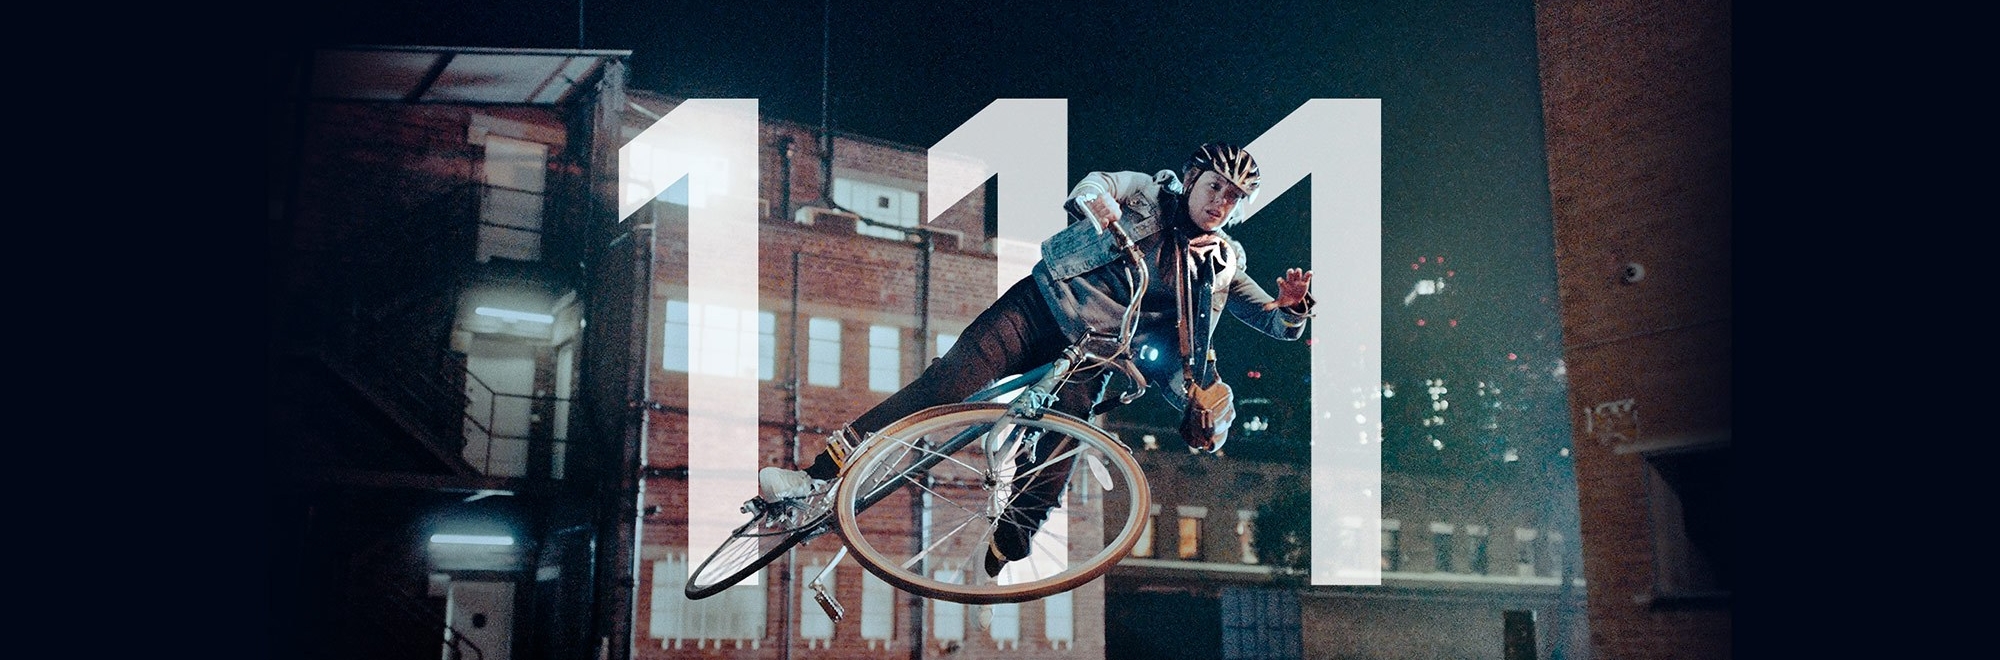 NHS England encourages people to “Think 111 First” in major new campaign